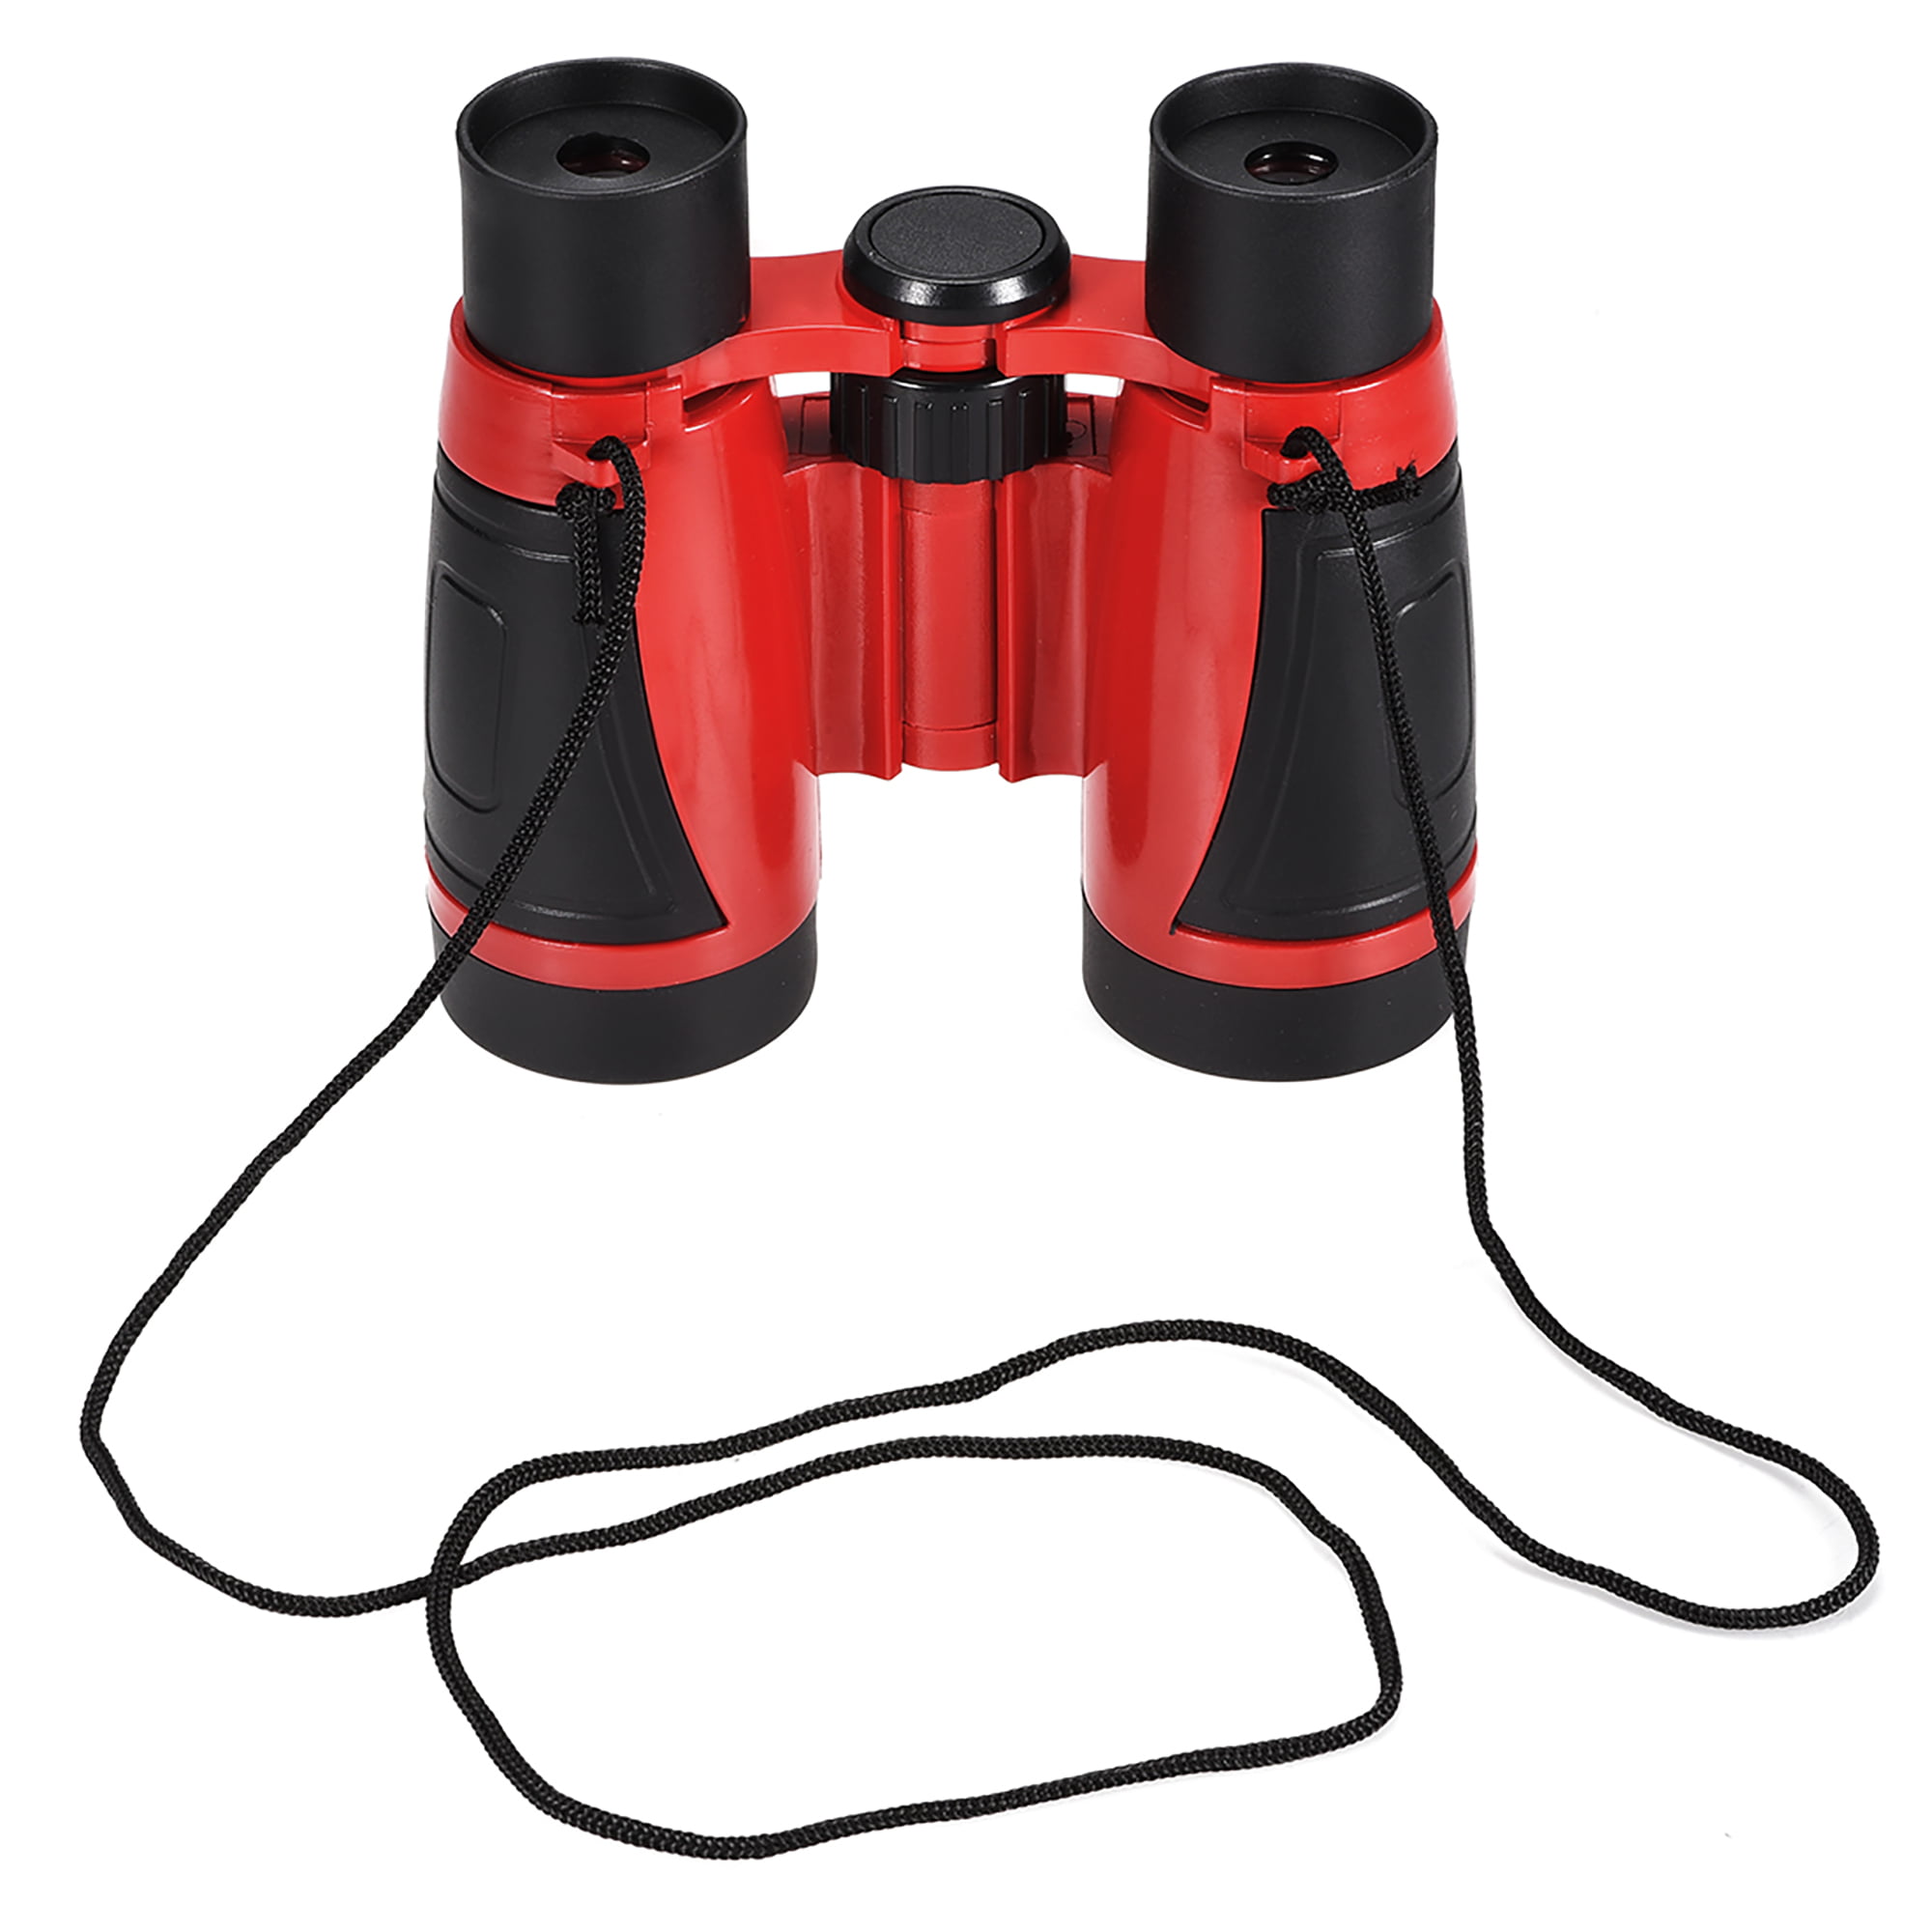 Top 101+ Images red binoculars toy with pictures Full HD, 2k, 4k